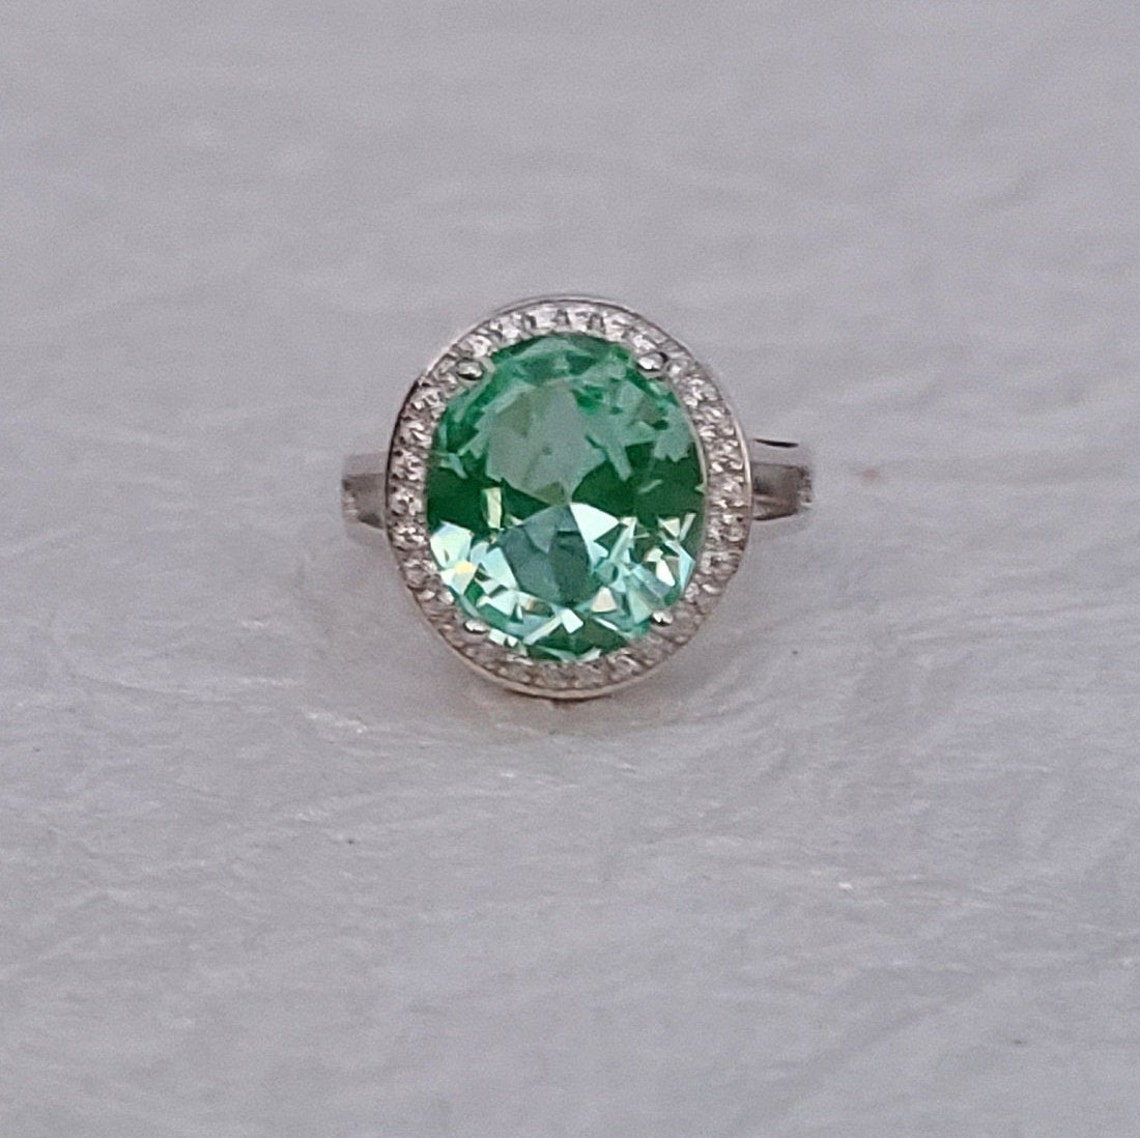 Green Spinel ring-Synthetic Spinel Rhodium plated ring-Spinel | Etsy